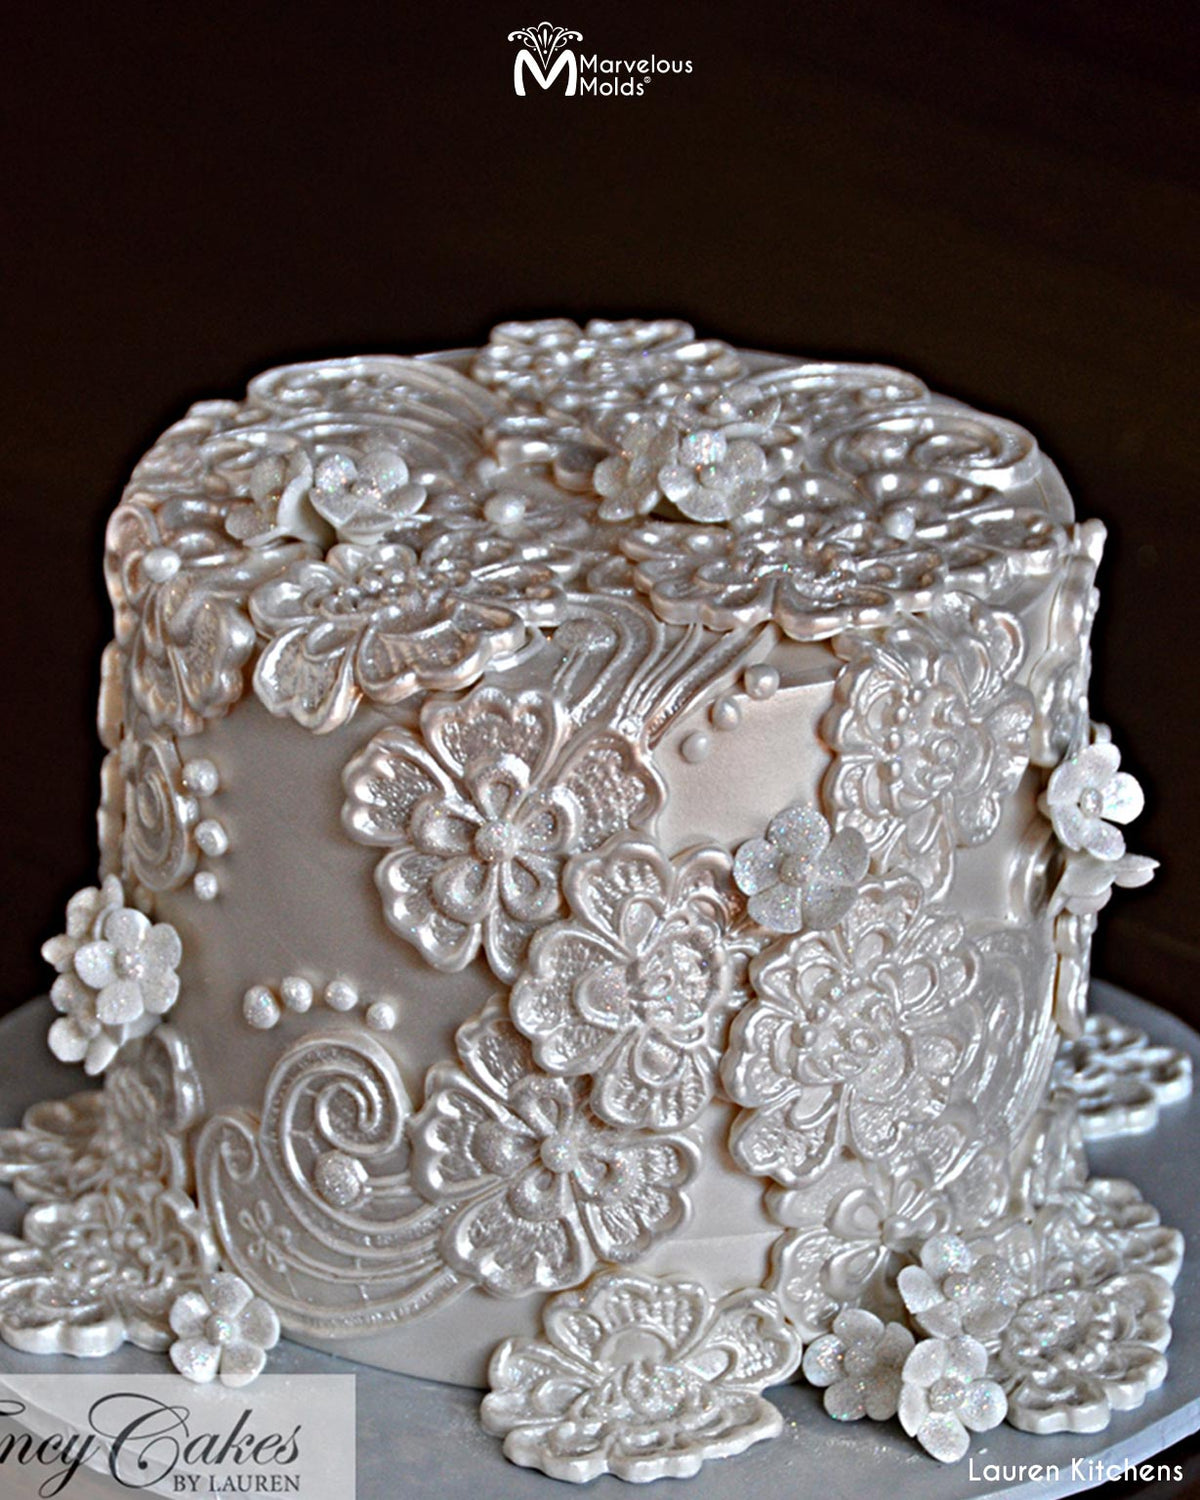 White Lace Wedding Cake Decorated with the Marvelous Molds Joan Left Lace Silicone Mold